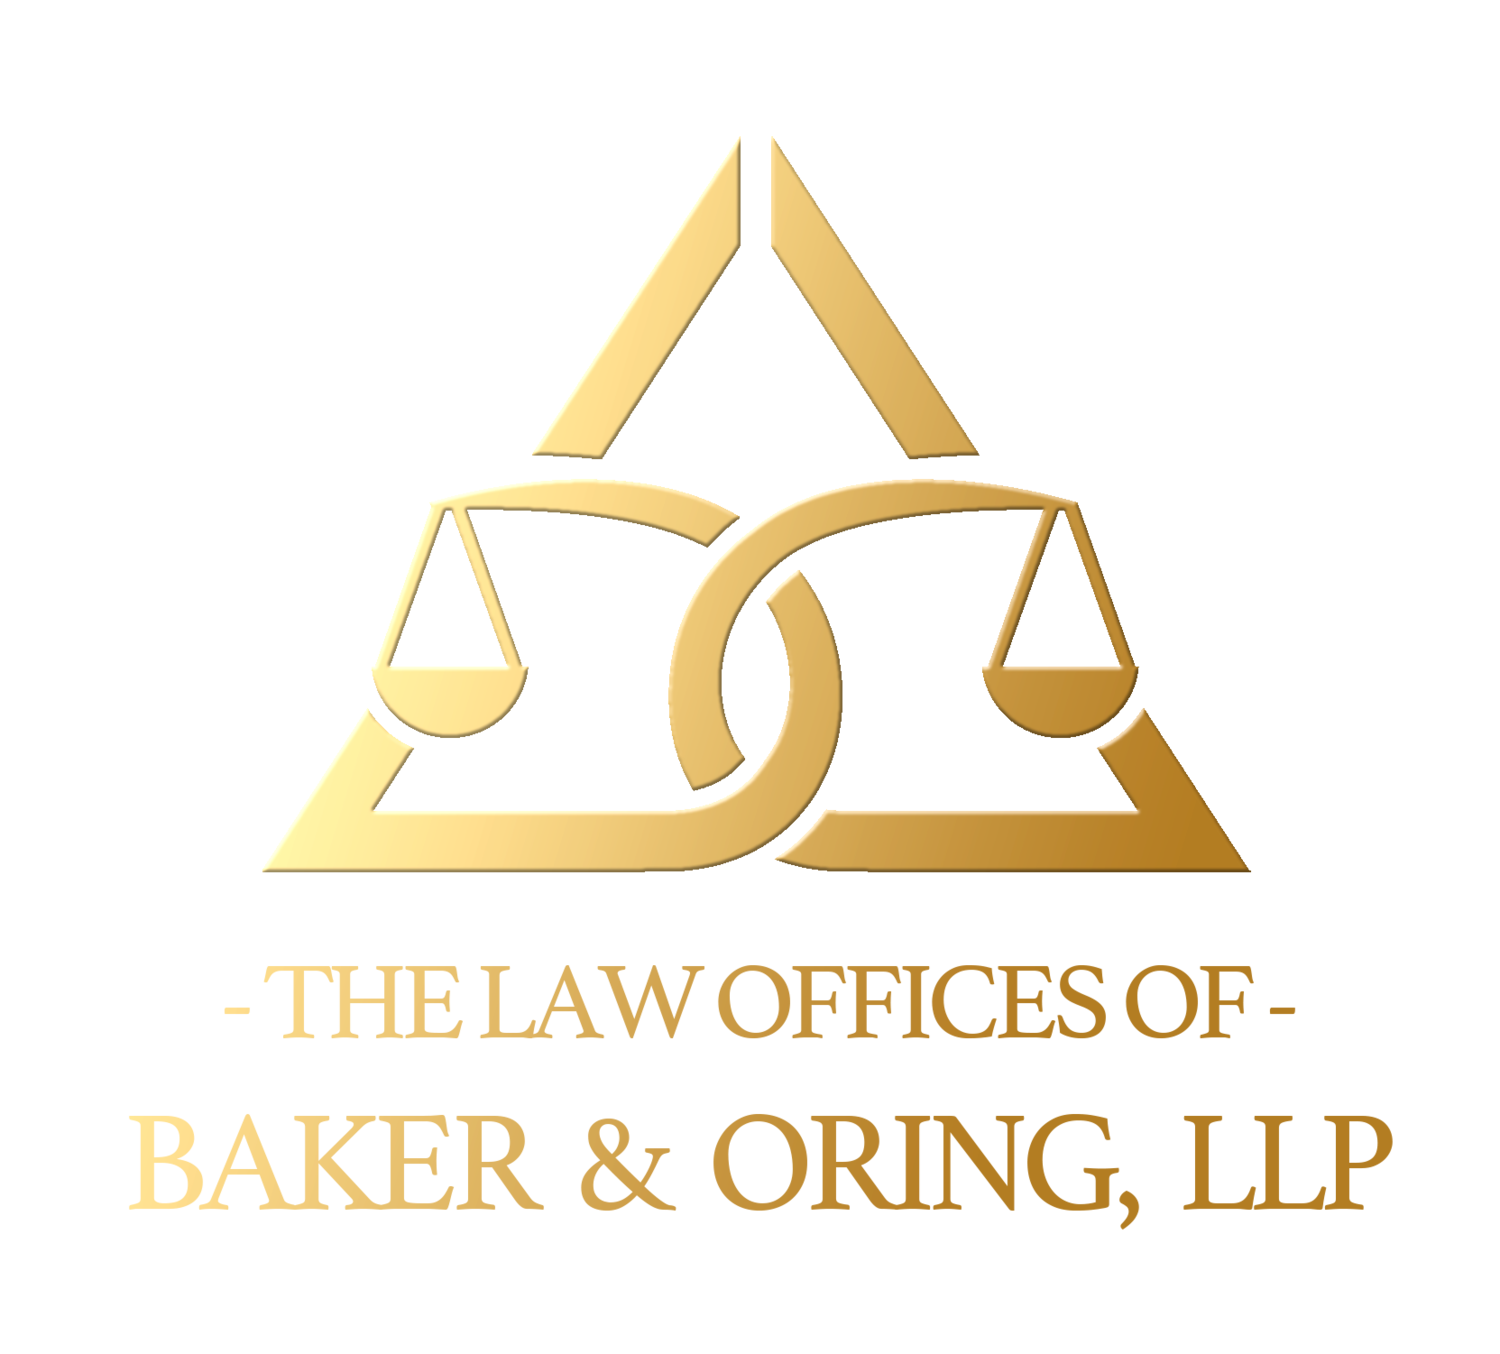 Baker and Oring, LLP